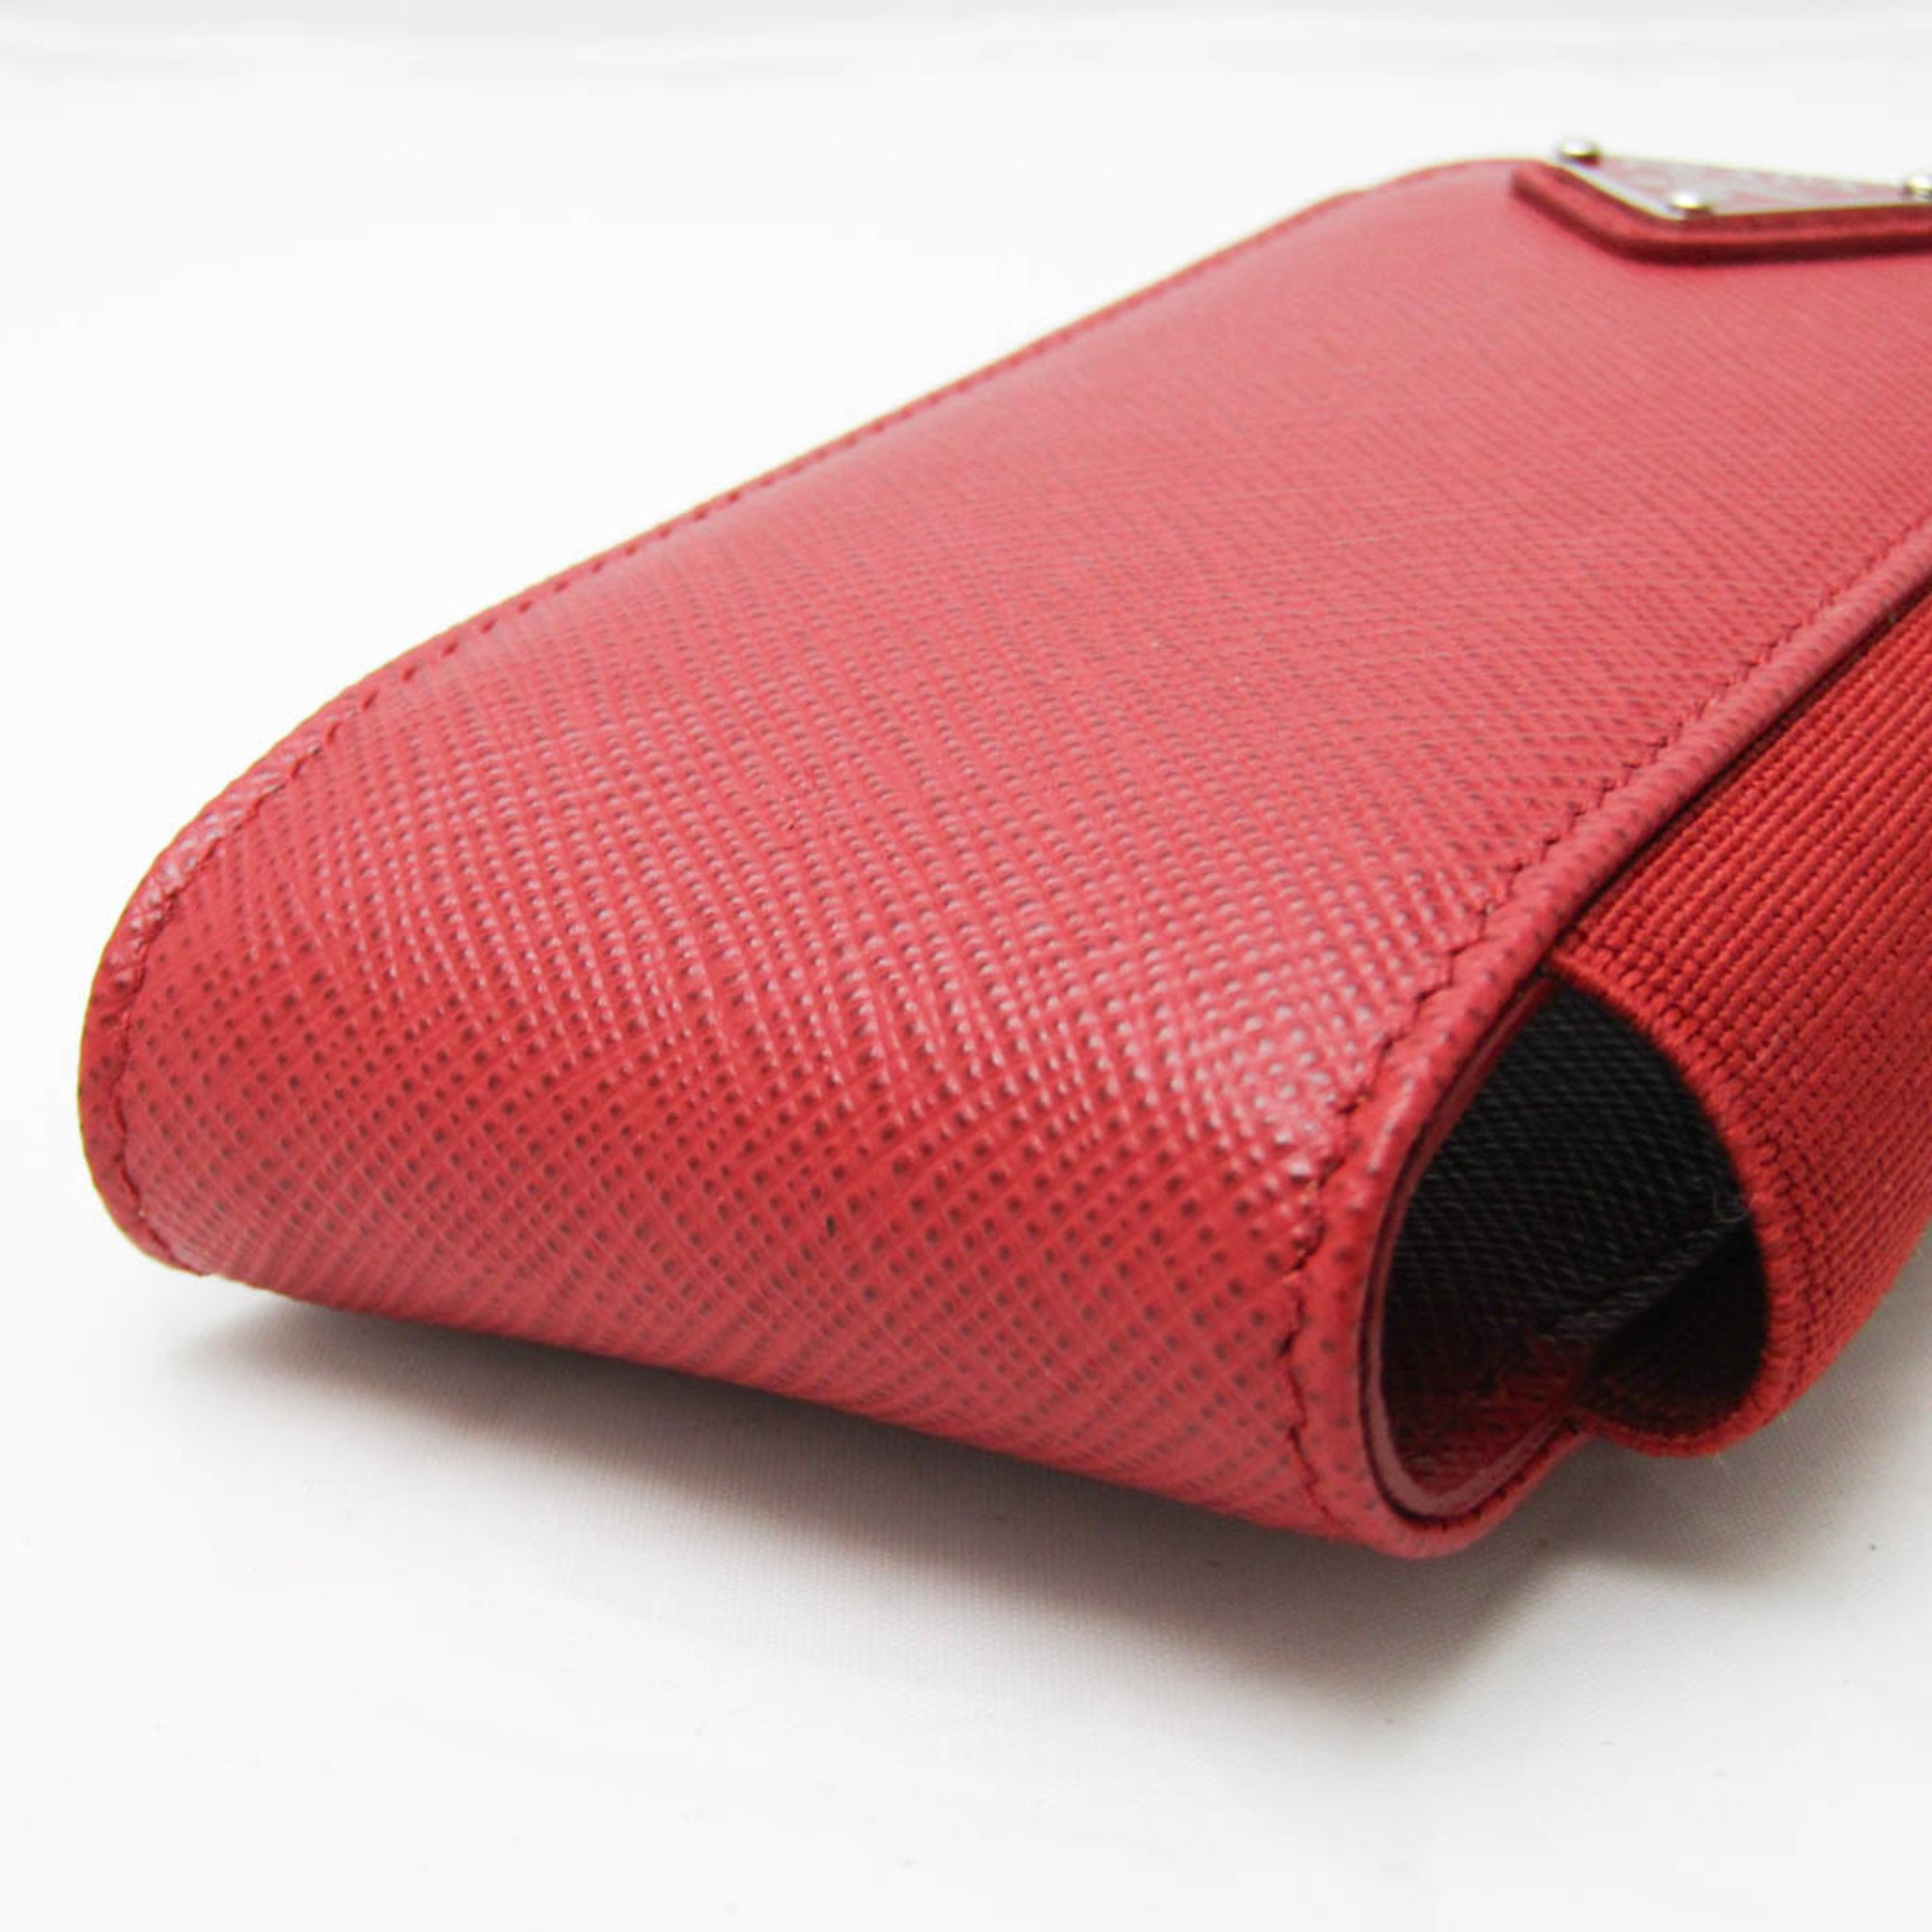 Prada Leather Phone Pouch/sleeve Red Color Smartphone case with strap 1ZT019